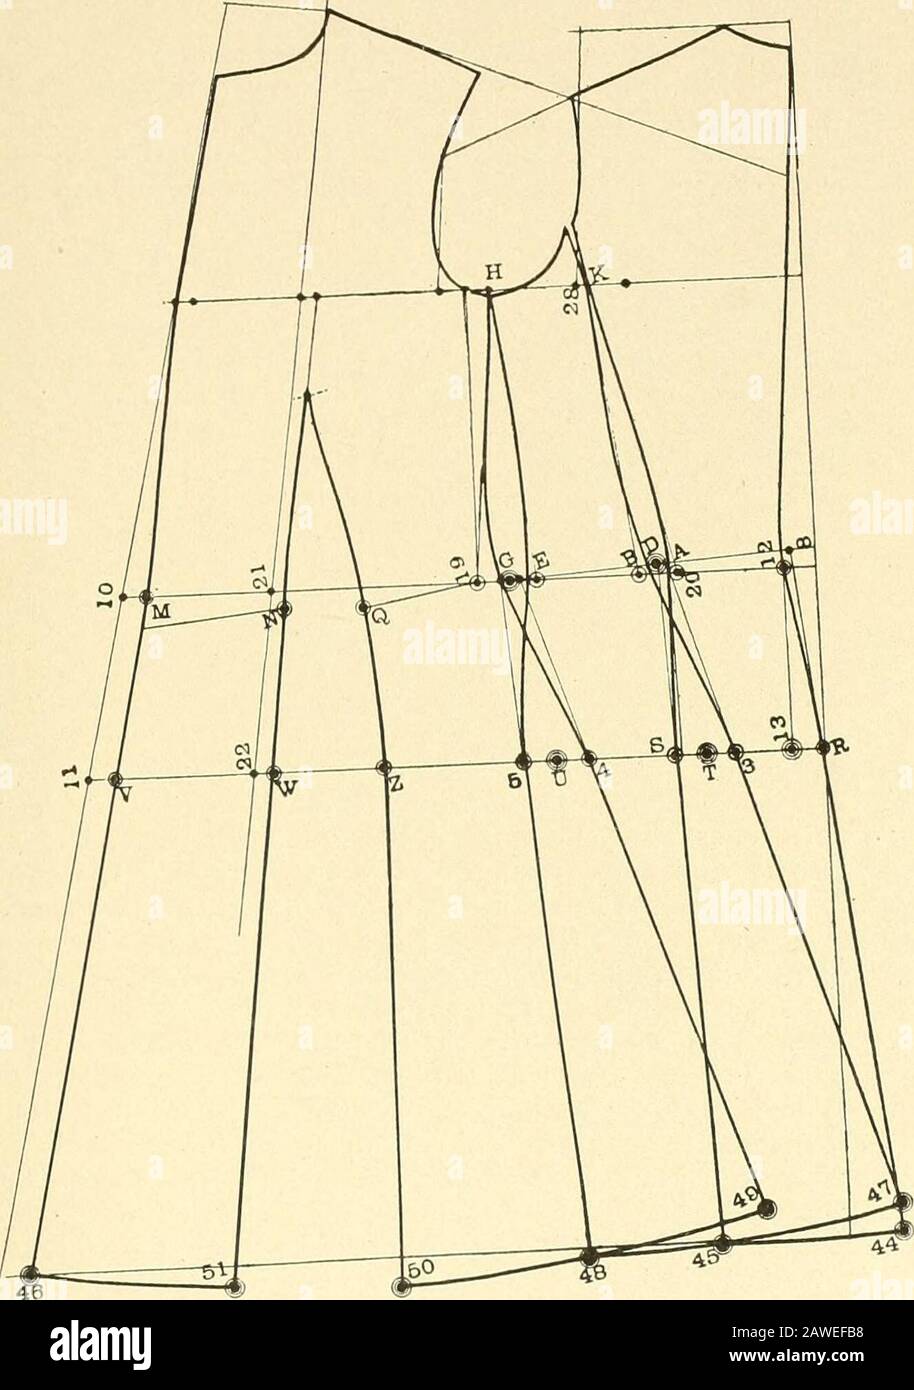 Merz's practical cutting system for ladies' jackets and cloaks .. . 48, the same direction from 4 to 49, and from3 to 47. Curve the lines from K to S, from K to 3, froiu 11to 5, and from H to 4. as represented. For semi-fitting front, from 10 to M and 11 to V is -J^inch; from M to N is &gt;^ waist; from N to Q is ^ of the frontwaist surplus. From V to W is ^/i inch more than from Mto N. From W to Z is the variation of hip and waist surplus,which is 3^ inch more than from N to O. Draw giiide lines from O through Z to 50, from N throughW to 51, and from M through V to 46. Pivot at the point ofco Stock Photo